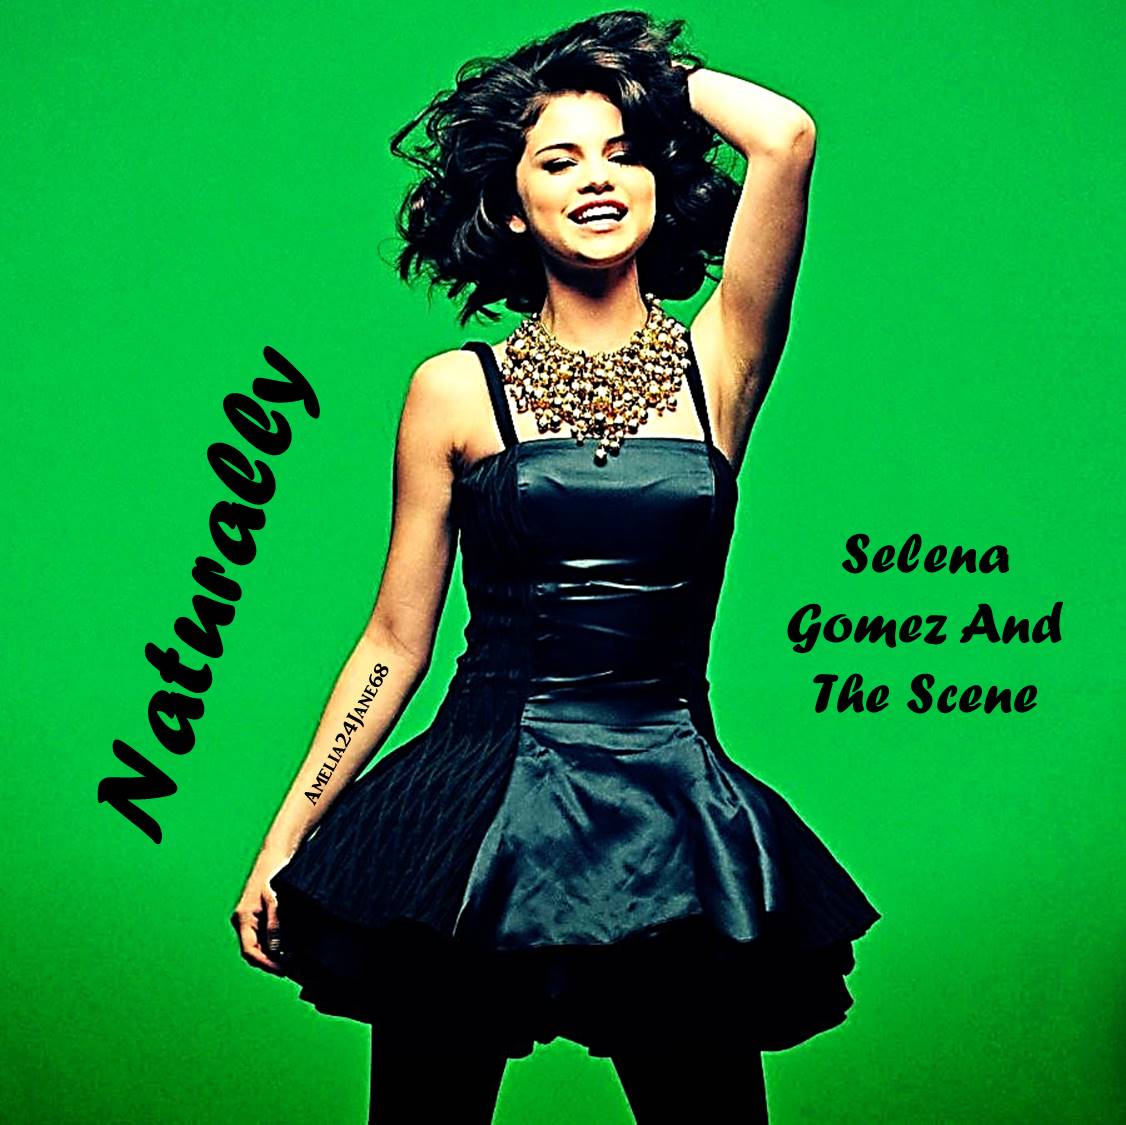 Naturally BY Selena Gomez And The Scene